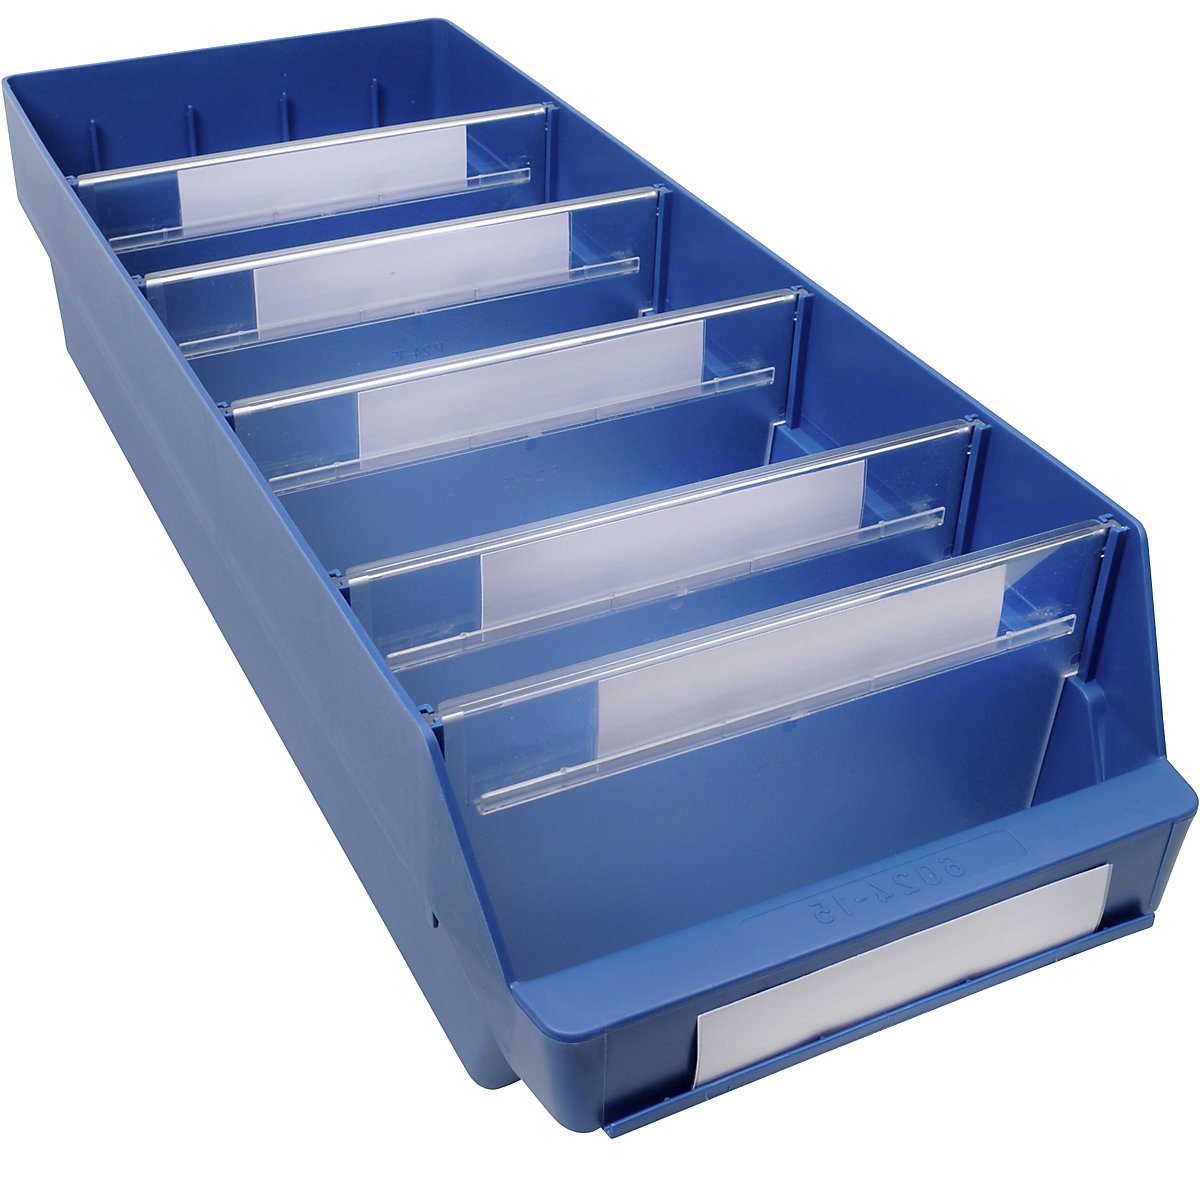 Shelf bin made of highly impact resistant polypropylene – STEMO, blue, LxWxH 600 x 240 x 150 mm, pack of 10-6